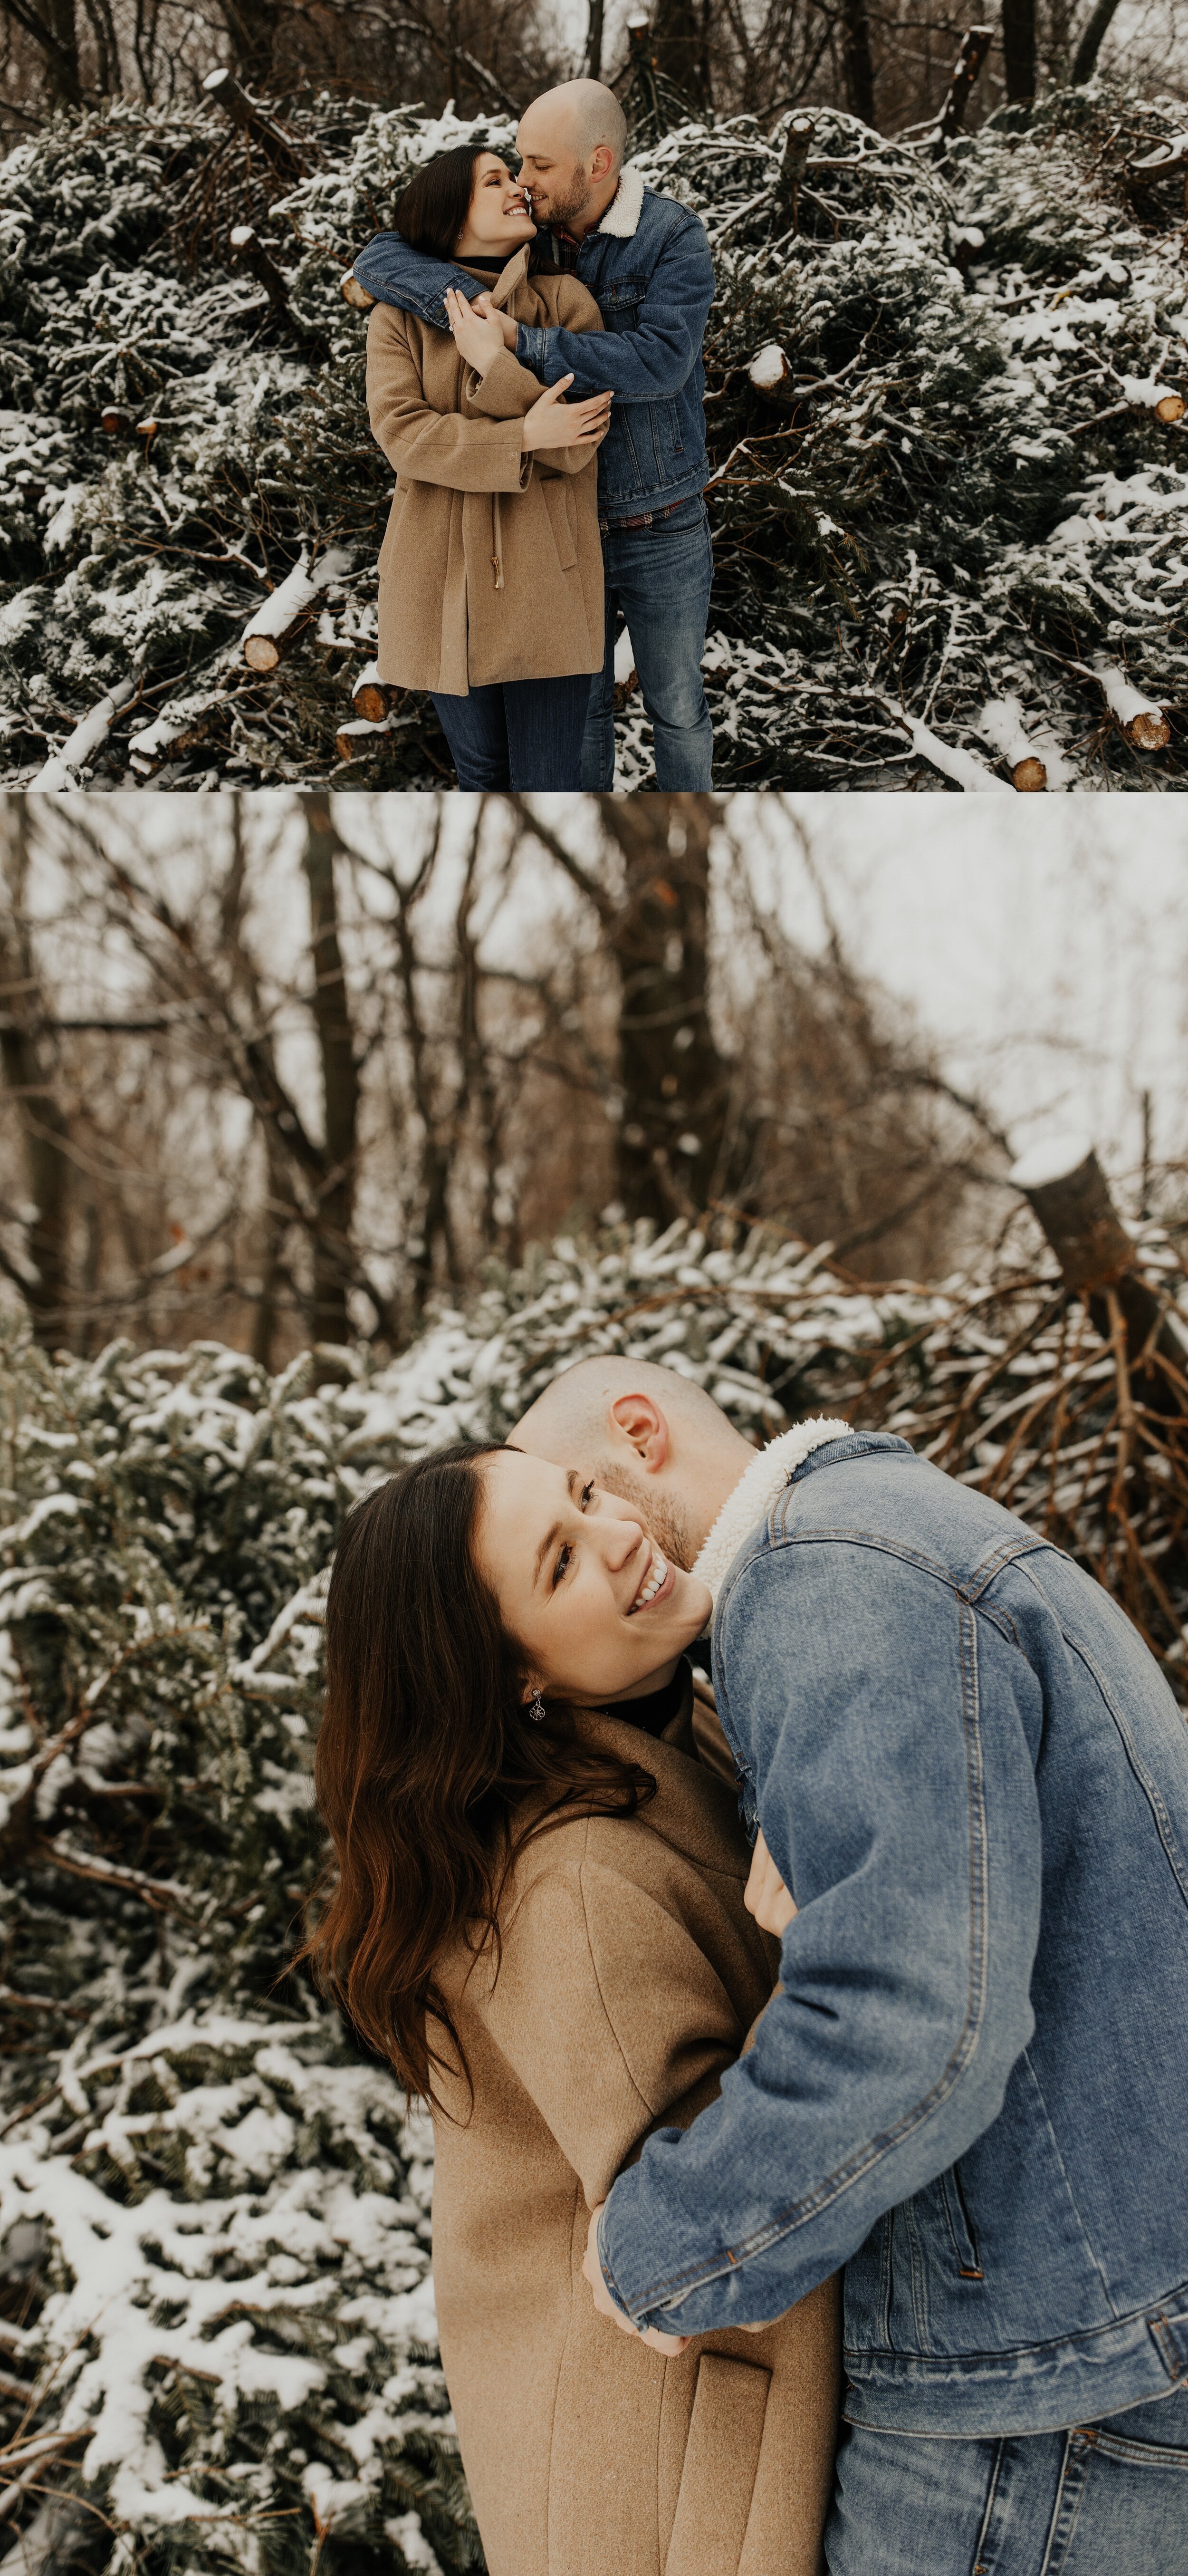 jessika-christine-photography-outdoor-engagement-couples-snow-adventurous-session (6).jpg